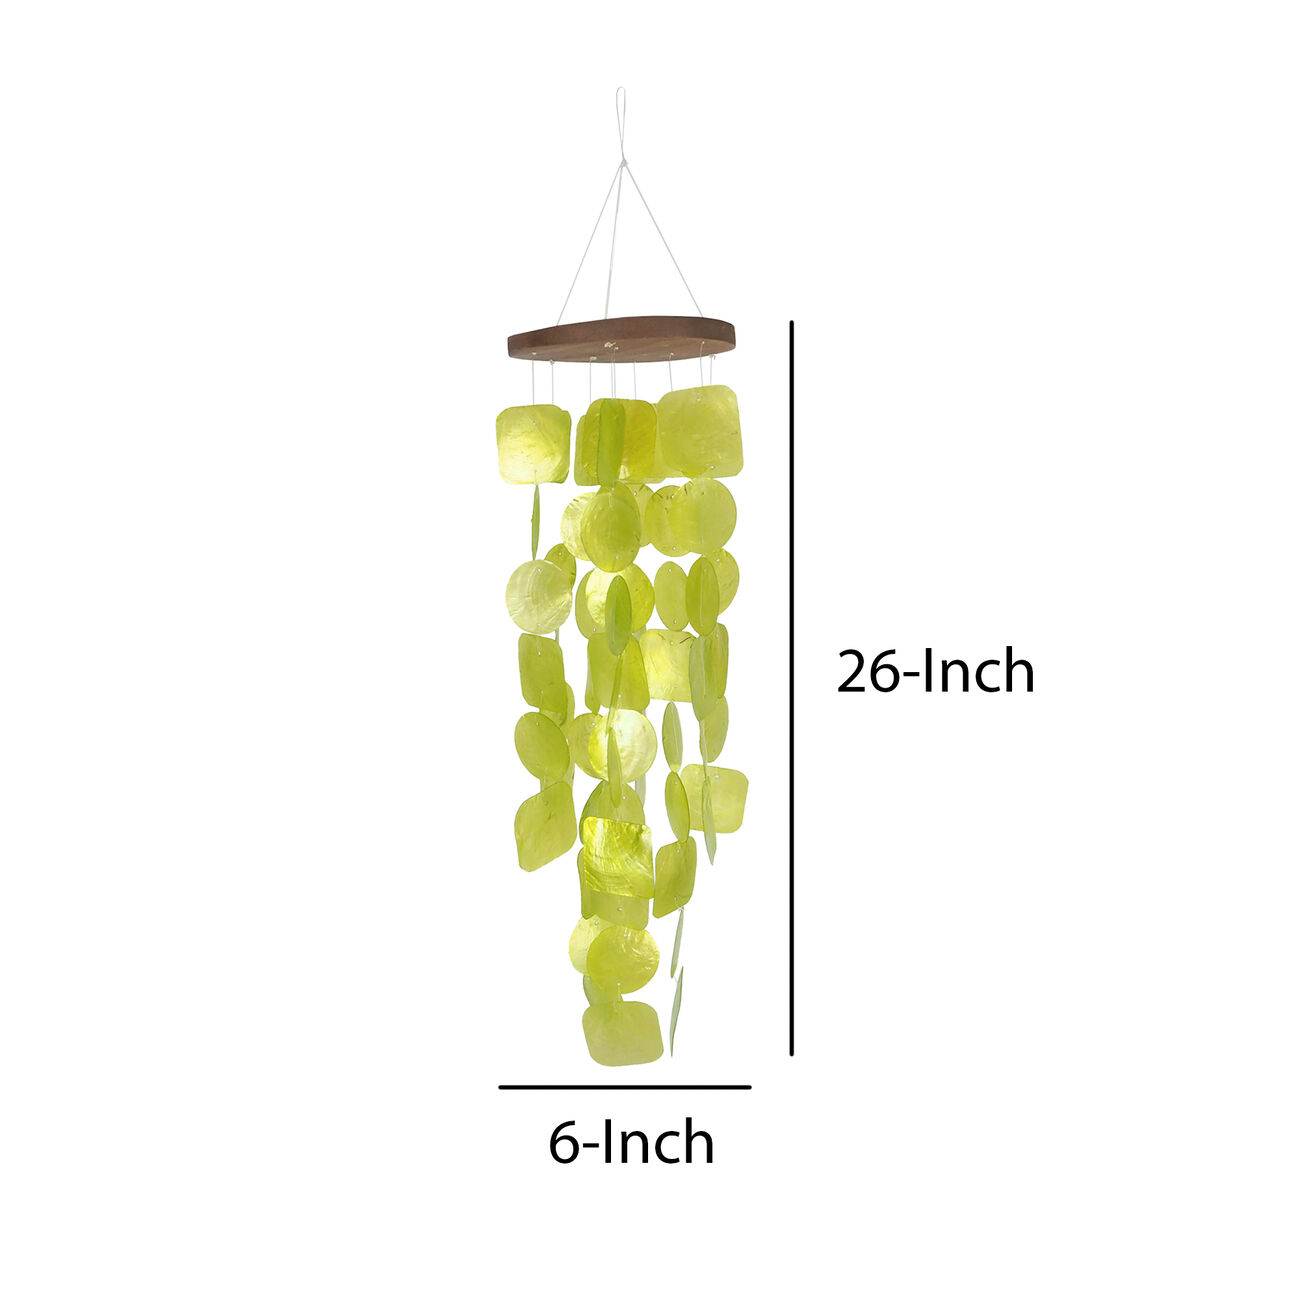 Aesthetically Designed Handmade Wind Chime with Capiz Shell Hangings, Green